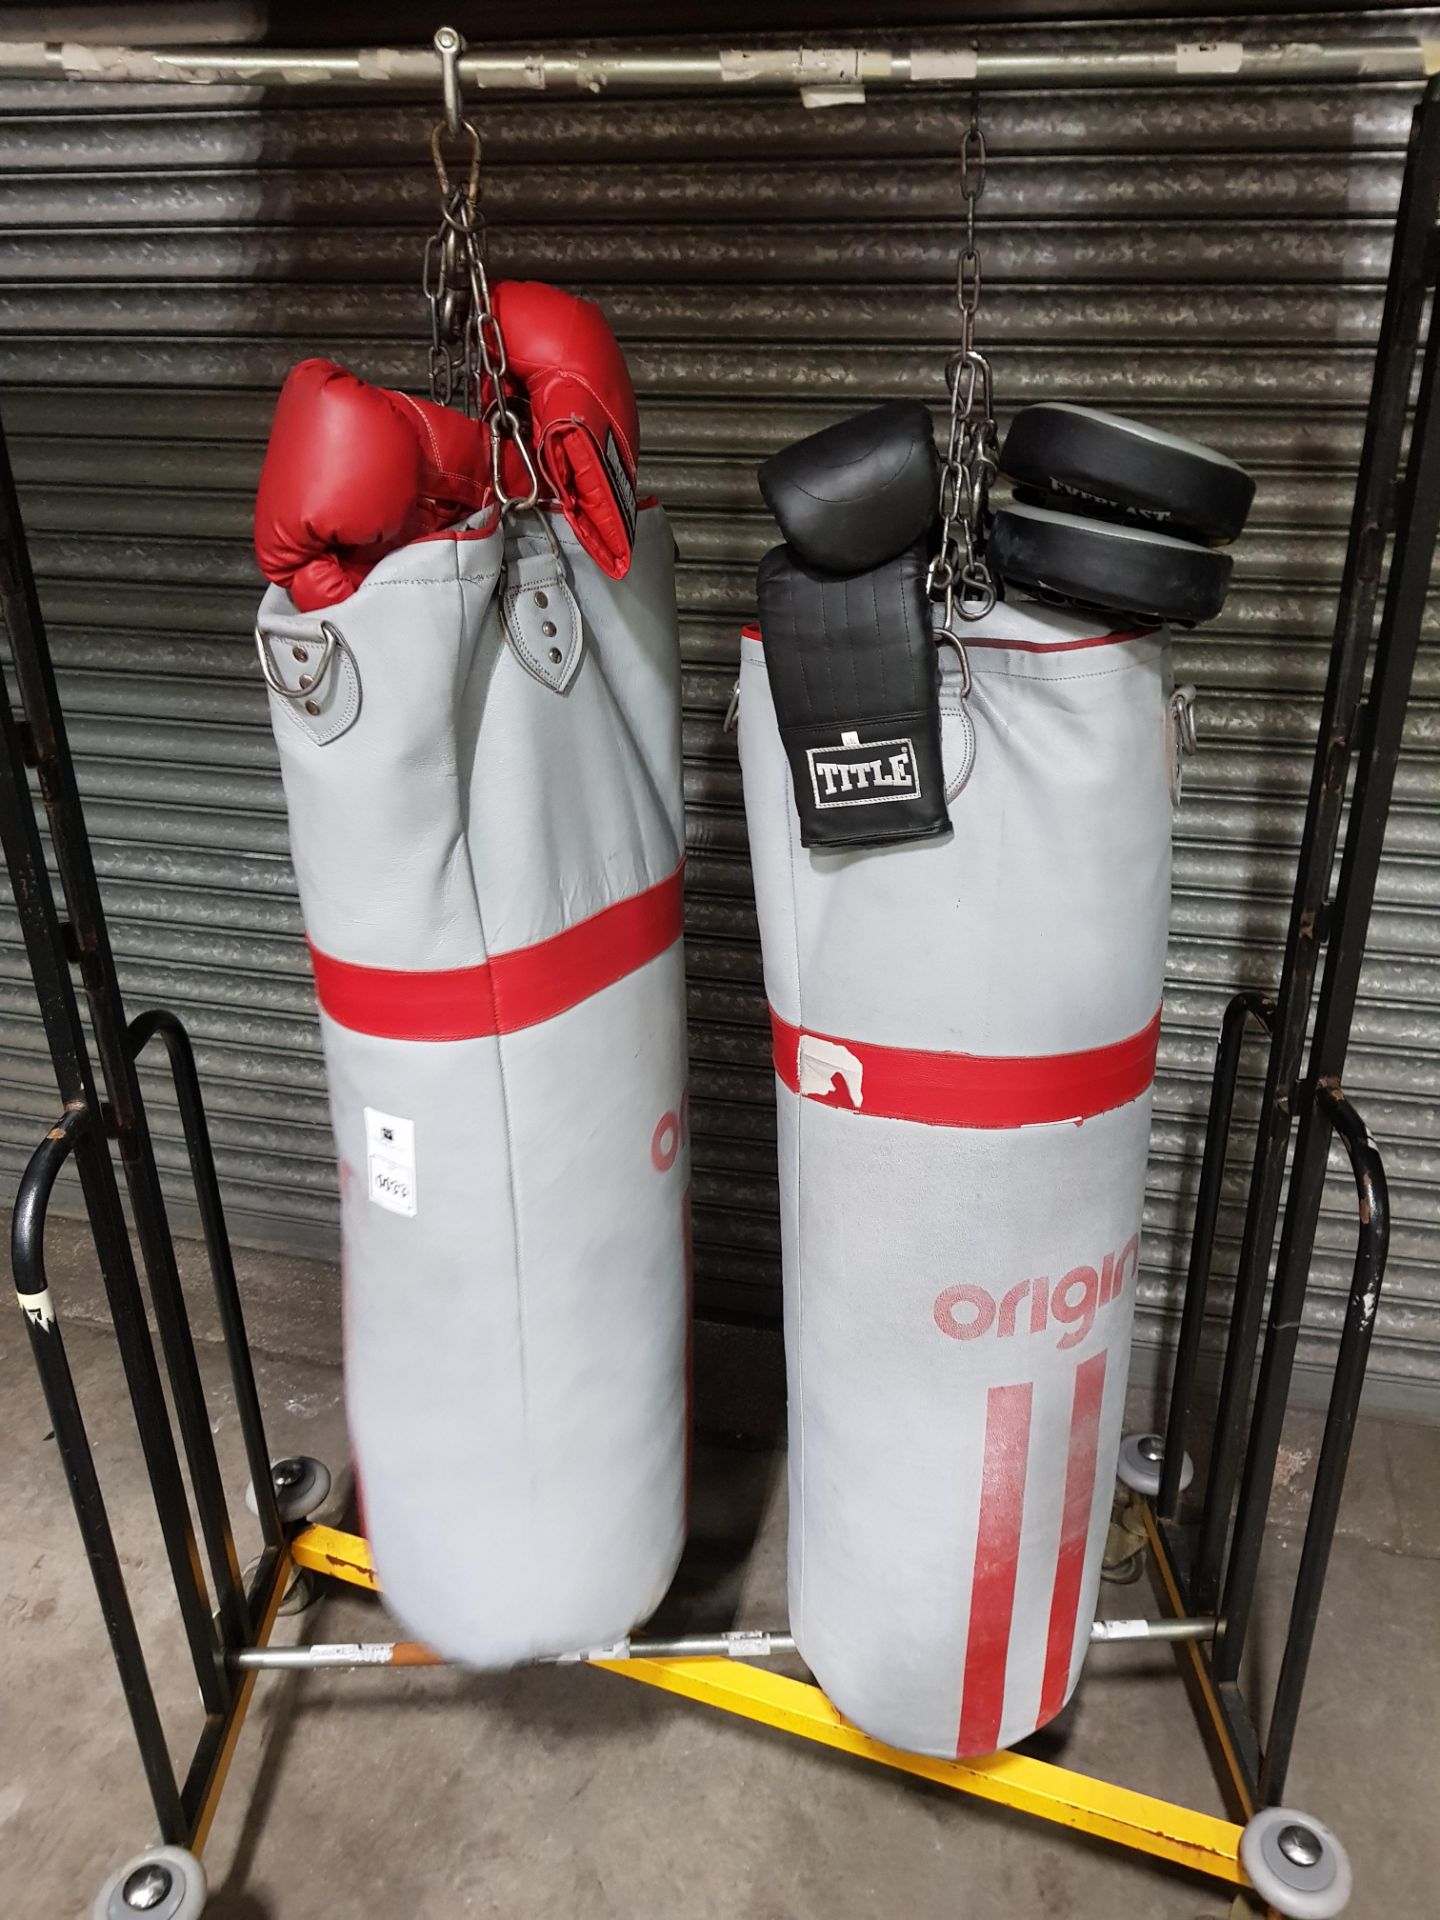 2 X HEAVILY USED ORIGIN GREY 4 FT LEATHER PUNCH BAGS WITH CHAINS / 2 PAIRS OF BOXING GLOVES AND 1